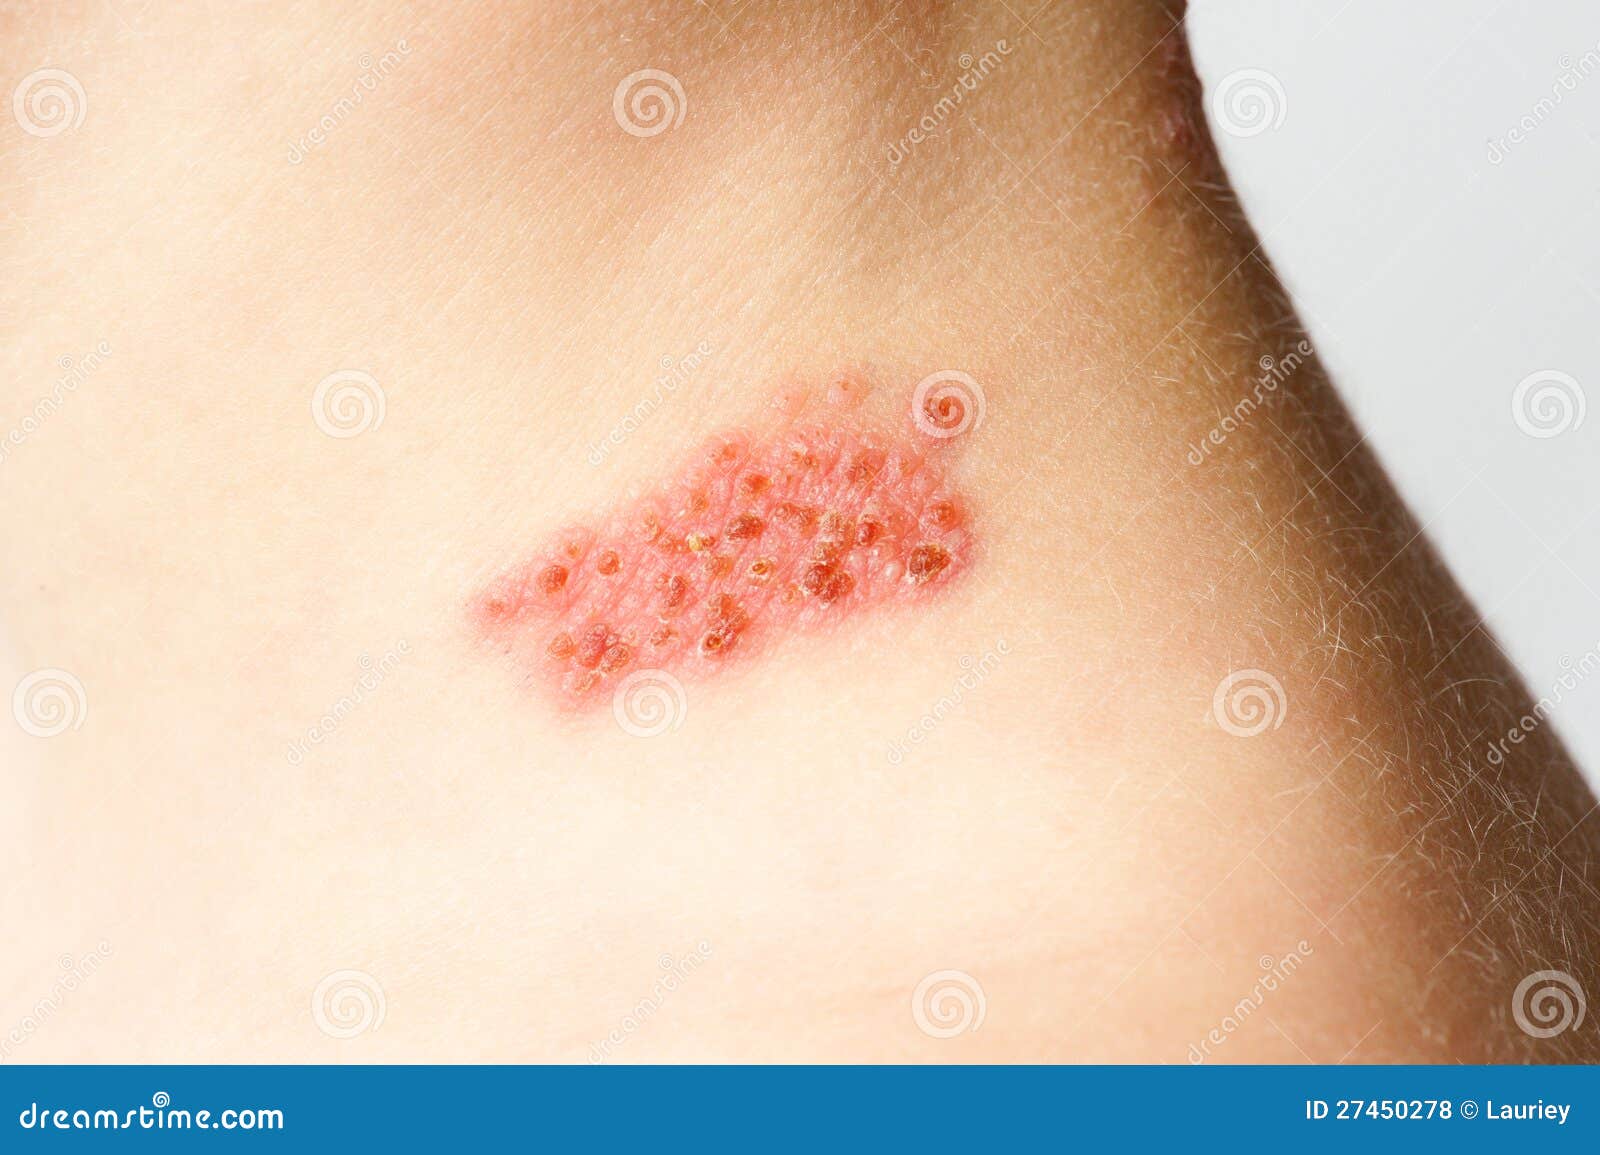 herpes scab pictures